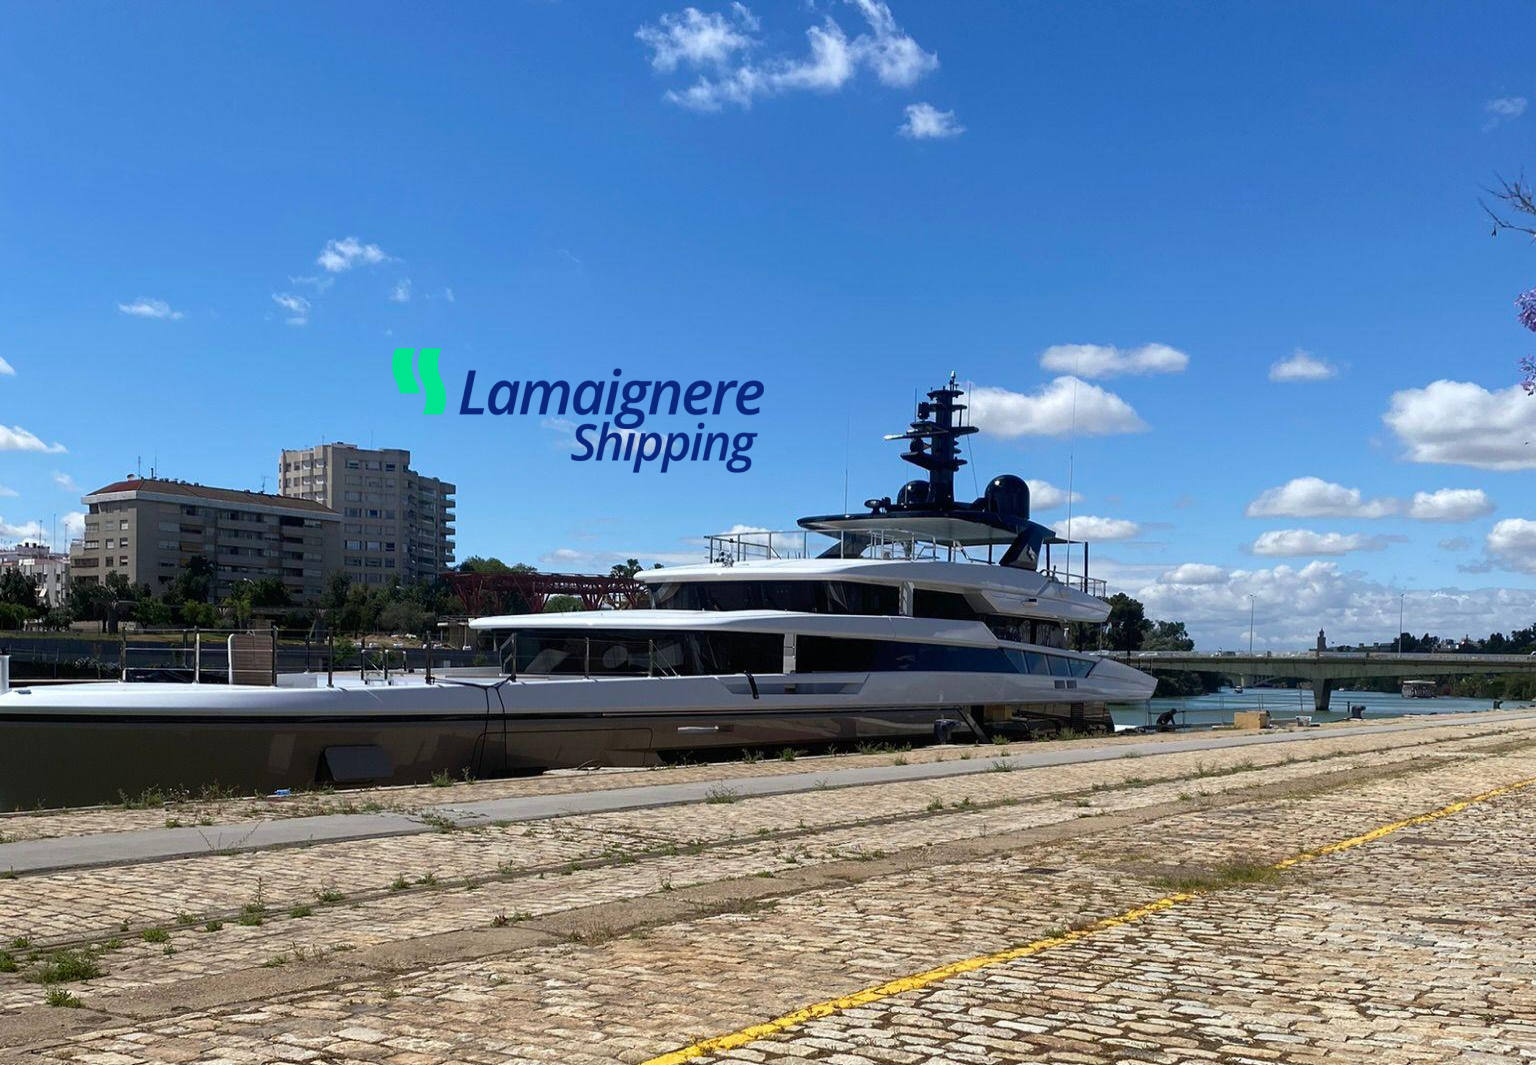 Lamaignere Shipping provides assistance to the Phoenician Yatch in Seville